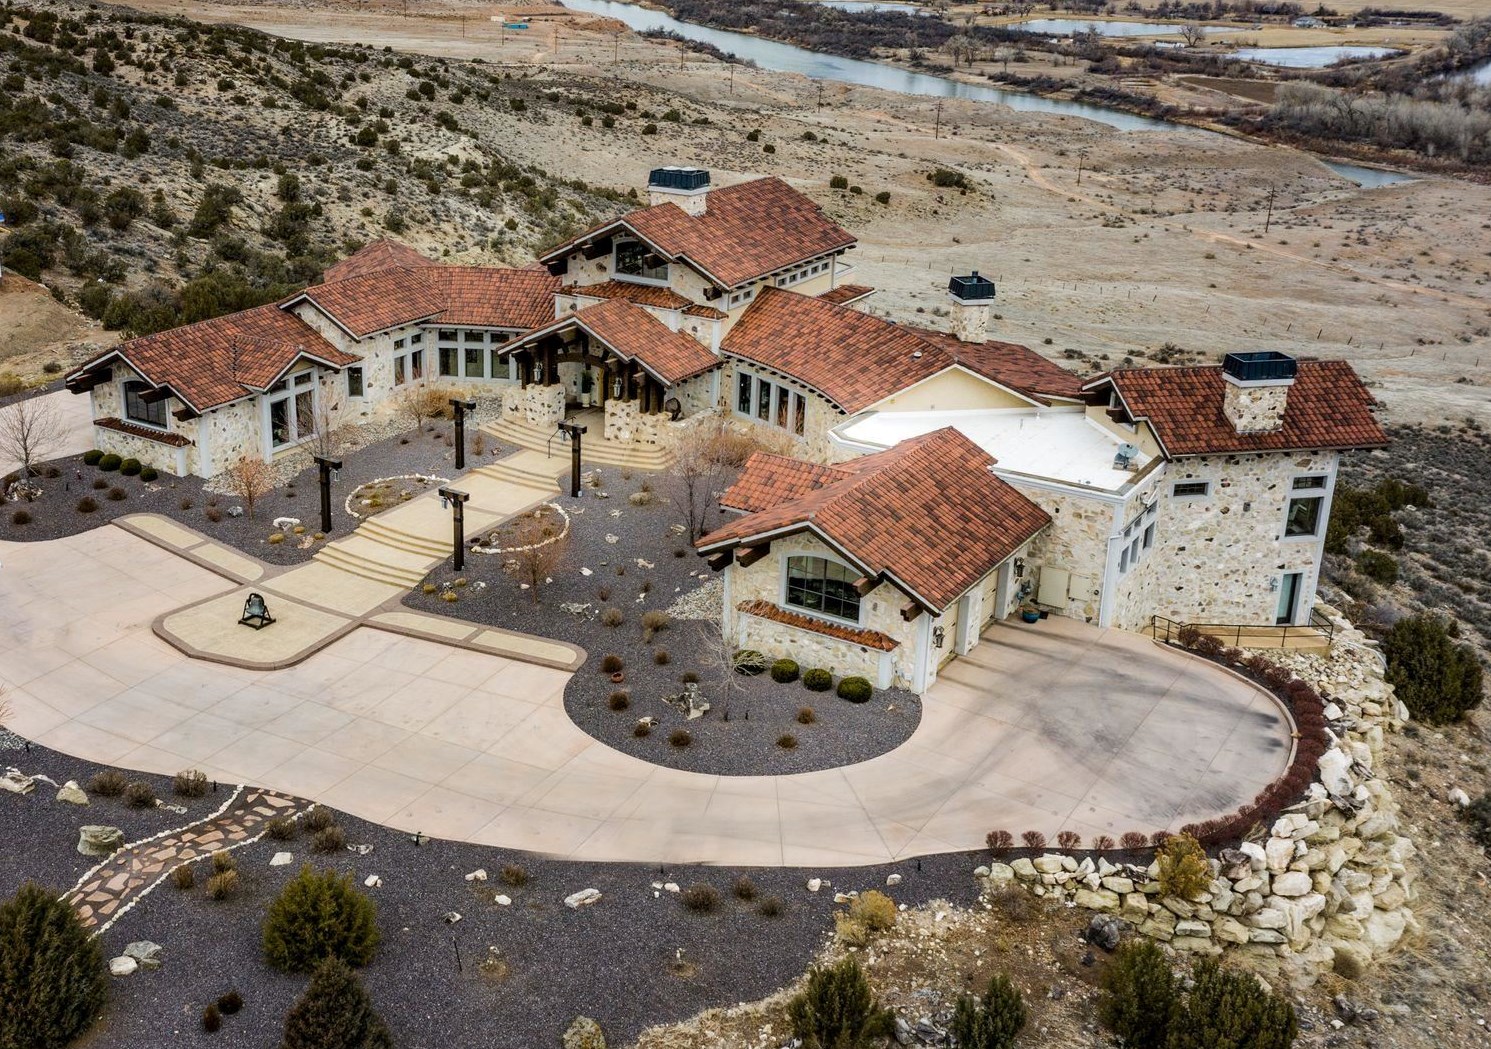 Do not miss your opportunity to own this captivating and timeless Grand Junction Estate. Nestled on 2.35 acres and has breathtaking 360-degree views. Inside you will find dramatic 34' tall ceilings, custom travertine floors, an astonishing stone, a floor-to-ceiling fireplace, and a chef's dream kitchen complete with a butler kitchen. The owner's suite has a true retreat feel. The temperature-controlled wine room is sure to satisfy the fussiest wine collector. Every window is a picture-perfect view of the cityscape, the Colorado River, the Colorado National Monument, The Grand Mesa, and the Bookcliffs. Downstairs you will find a game room, a custom Home Theatre and a 6-person steam room. The guest wing features a powder room, 2 guest suites (each with en suites), and private entrances. The home has 2 garages on opposite ends of the home. The house was built in 2006 and took over two years to complete. The stone was quarried on site. The home runs on Geothermal for heating and cooling and the exterior walls are 12" thick. Out back you will enjoy those stunning Colorado Sunsets on your ultra-private patio. The suspended patio overlooks the Colorado River and has full city views. This outdoor space is complete with a fireplace, hot tub, and room to entertain all your guests.